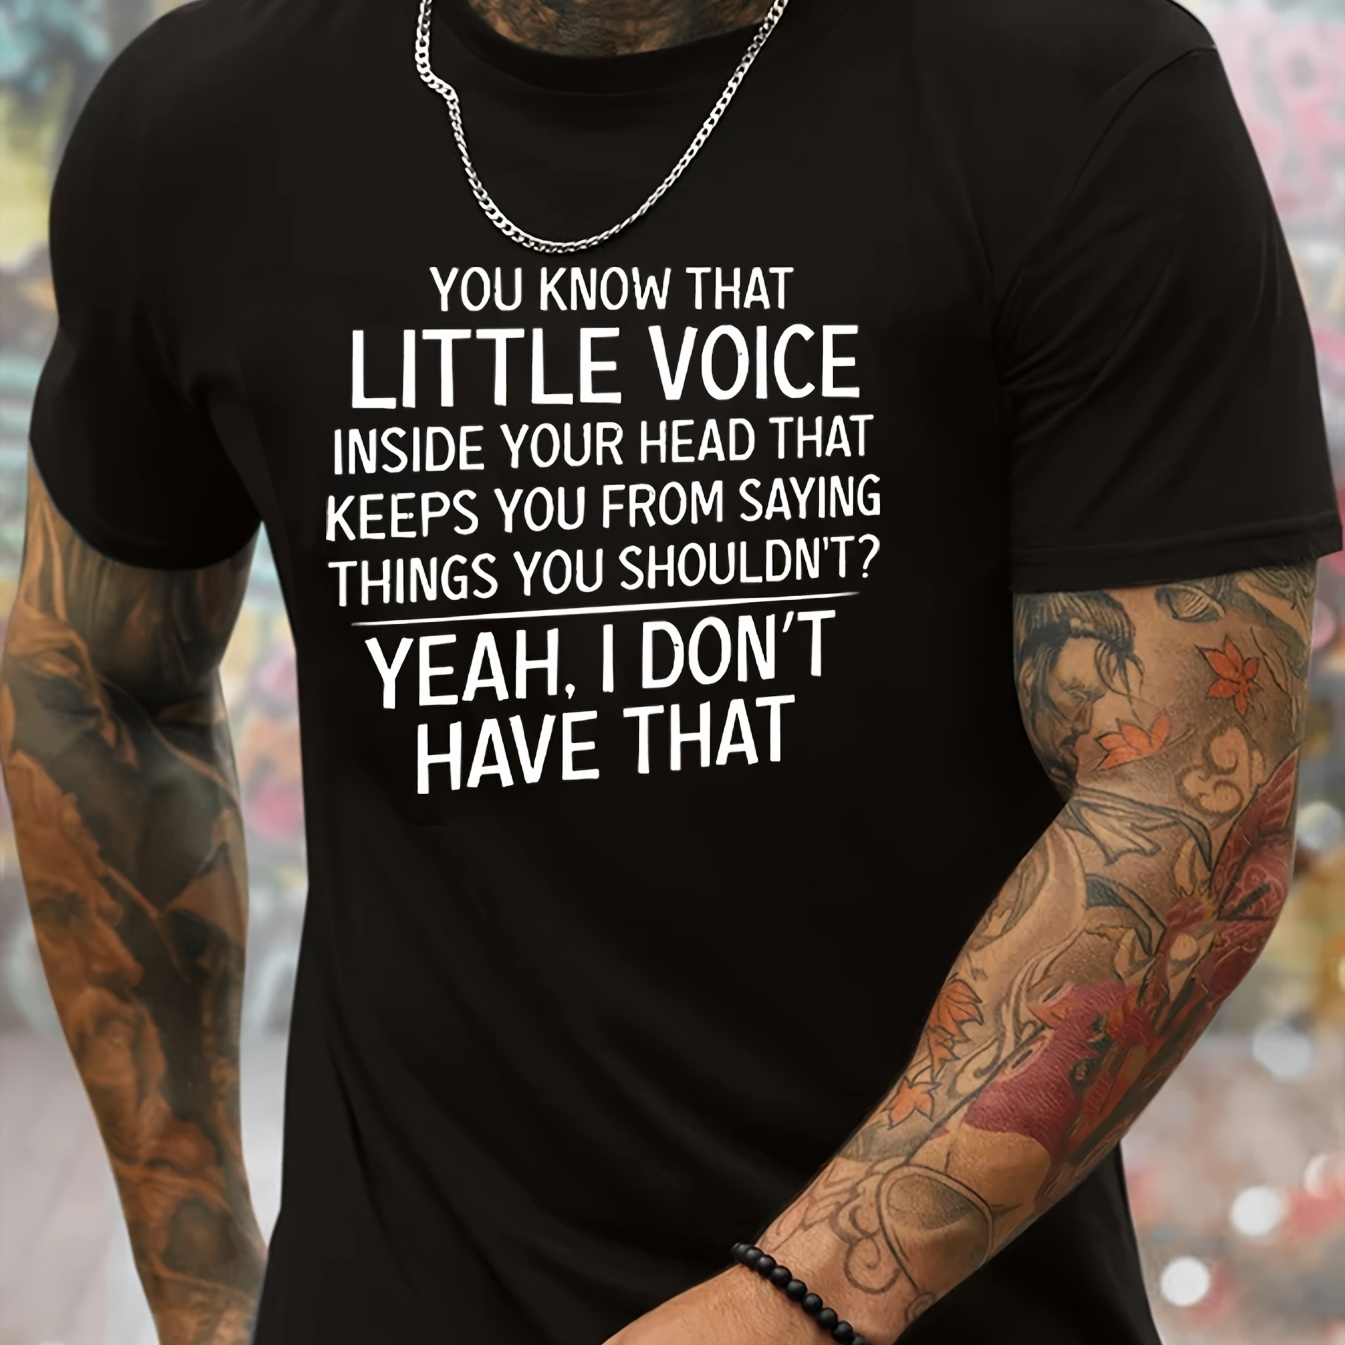 

You Know That Little Voice I Don't Have That Print Men's Round Neck Short Sleeve Tee Fashion Regular Fit T-shirt Top For Spring Summer Holiday